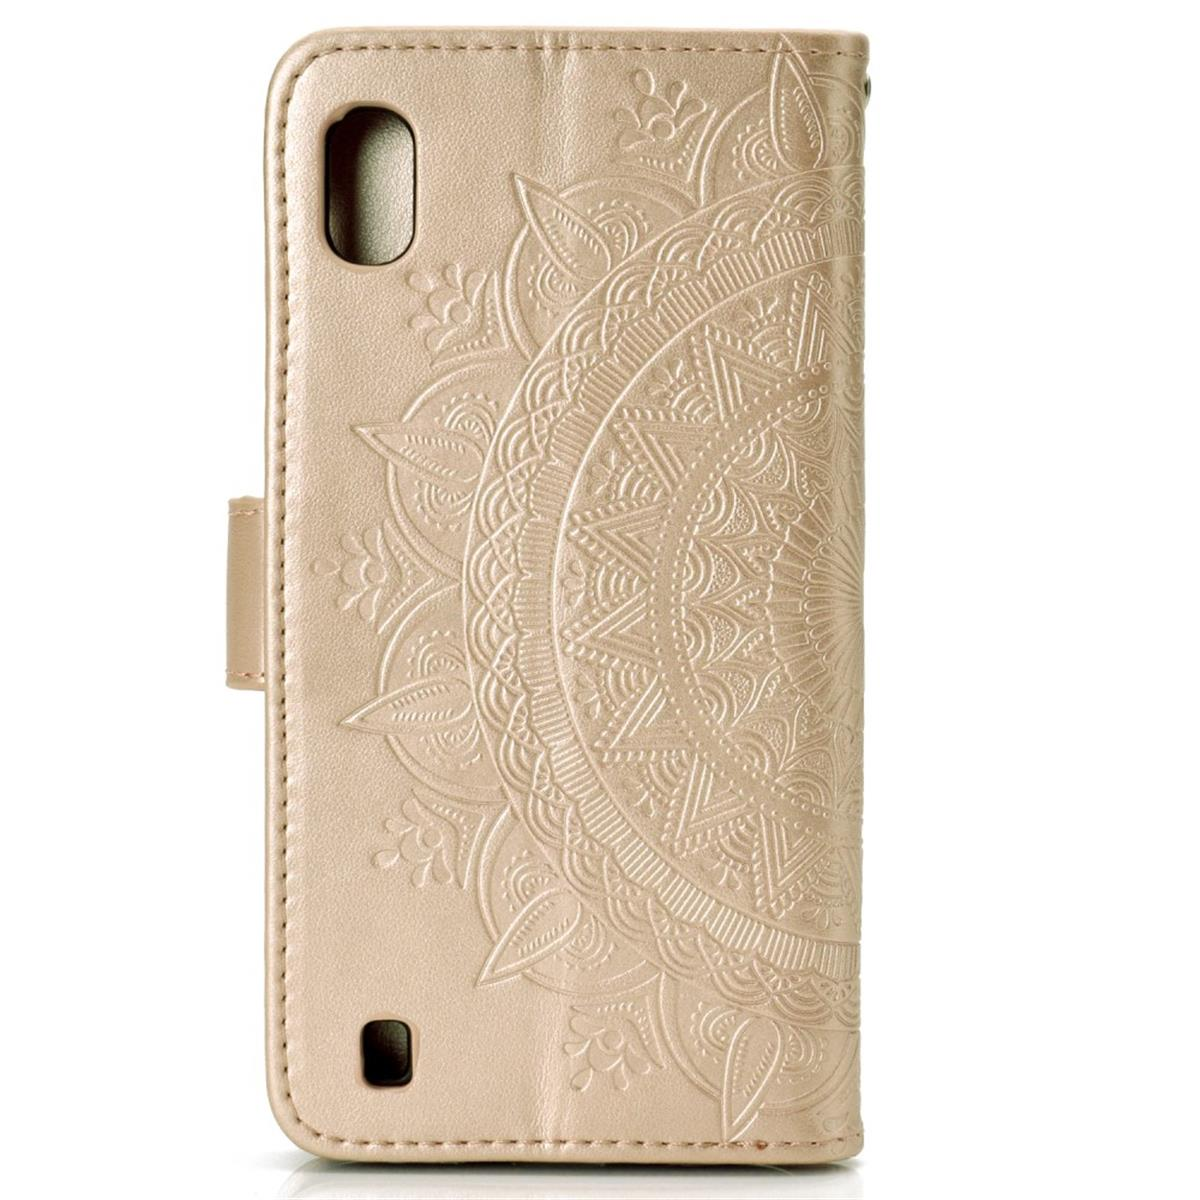 Gold Bookcover, COVERKINGZ Mandala A10, Samsung, Klapphülle mit Galaxy Muster,